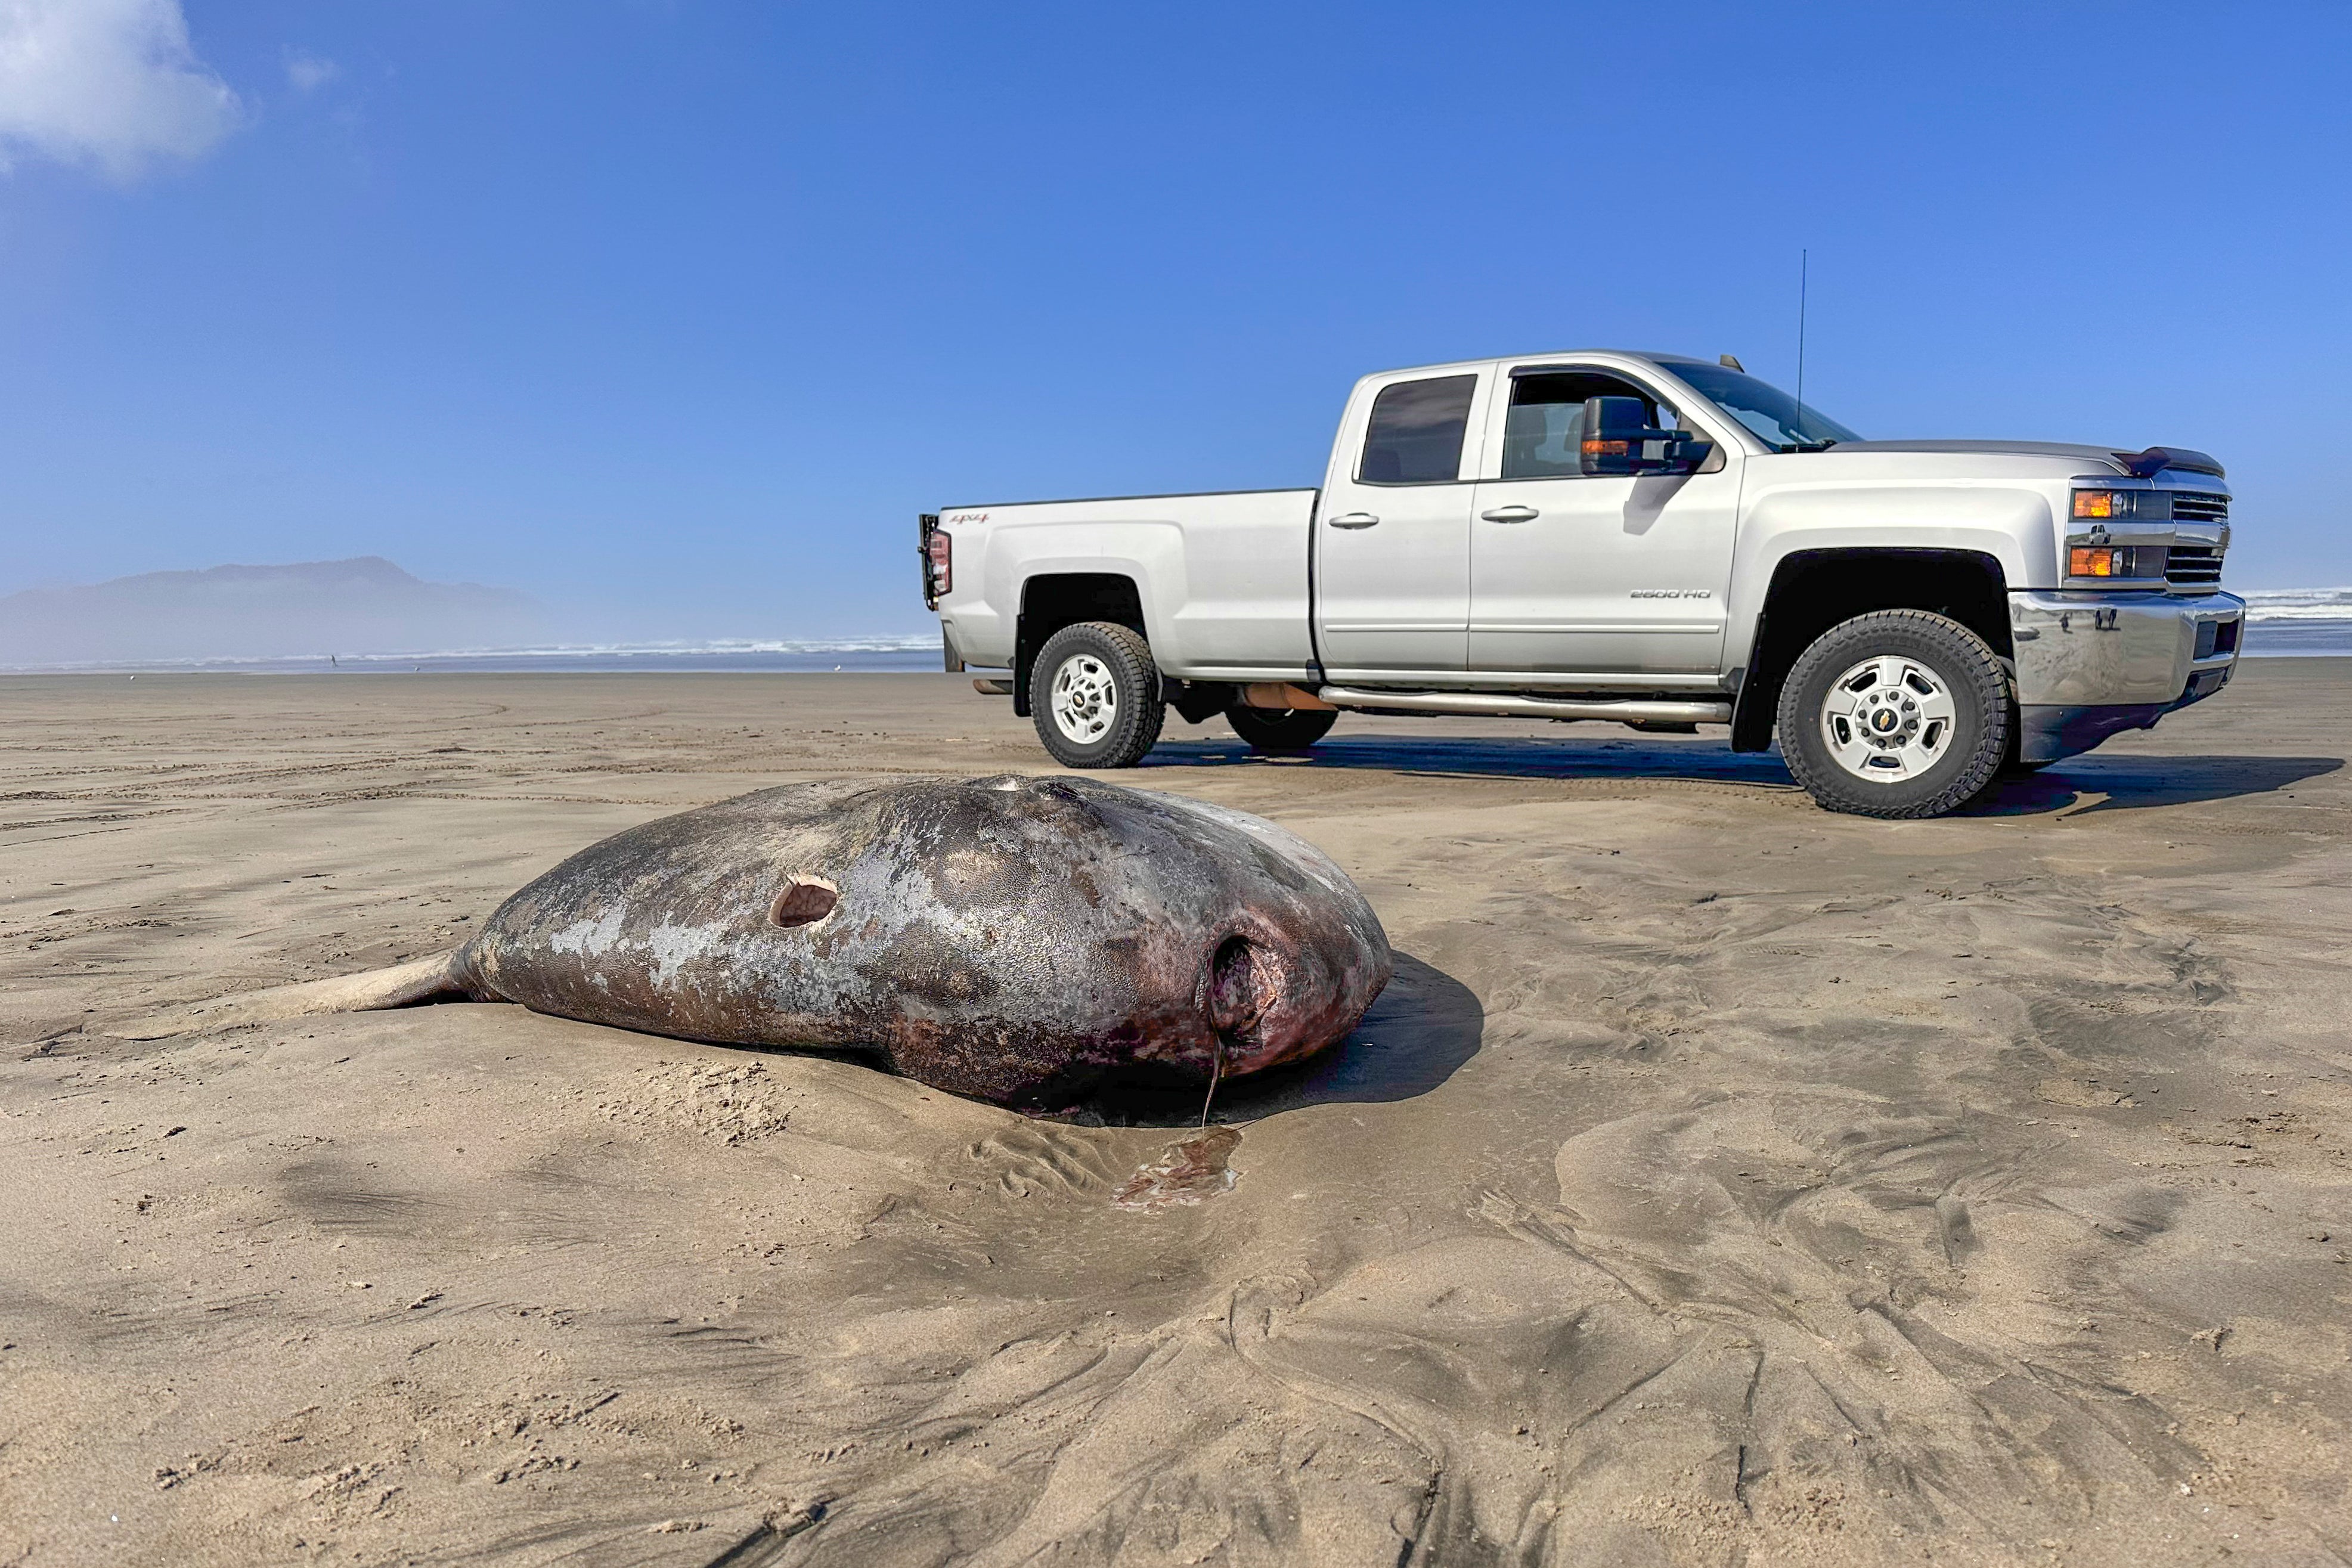 This image provided by Seaside Aquarium shows a hoodwinker sunfish that washed ashore on June 3, 2024, on a beach in Gearhart, Ore